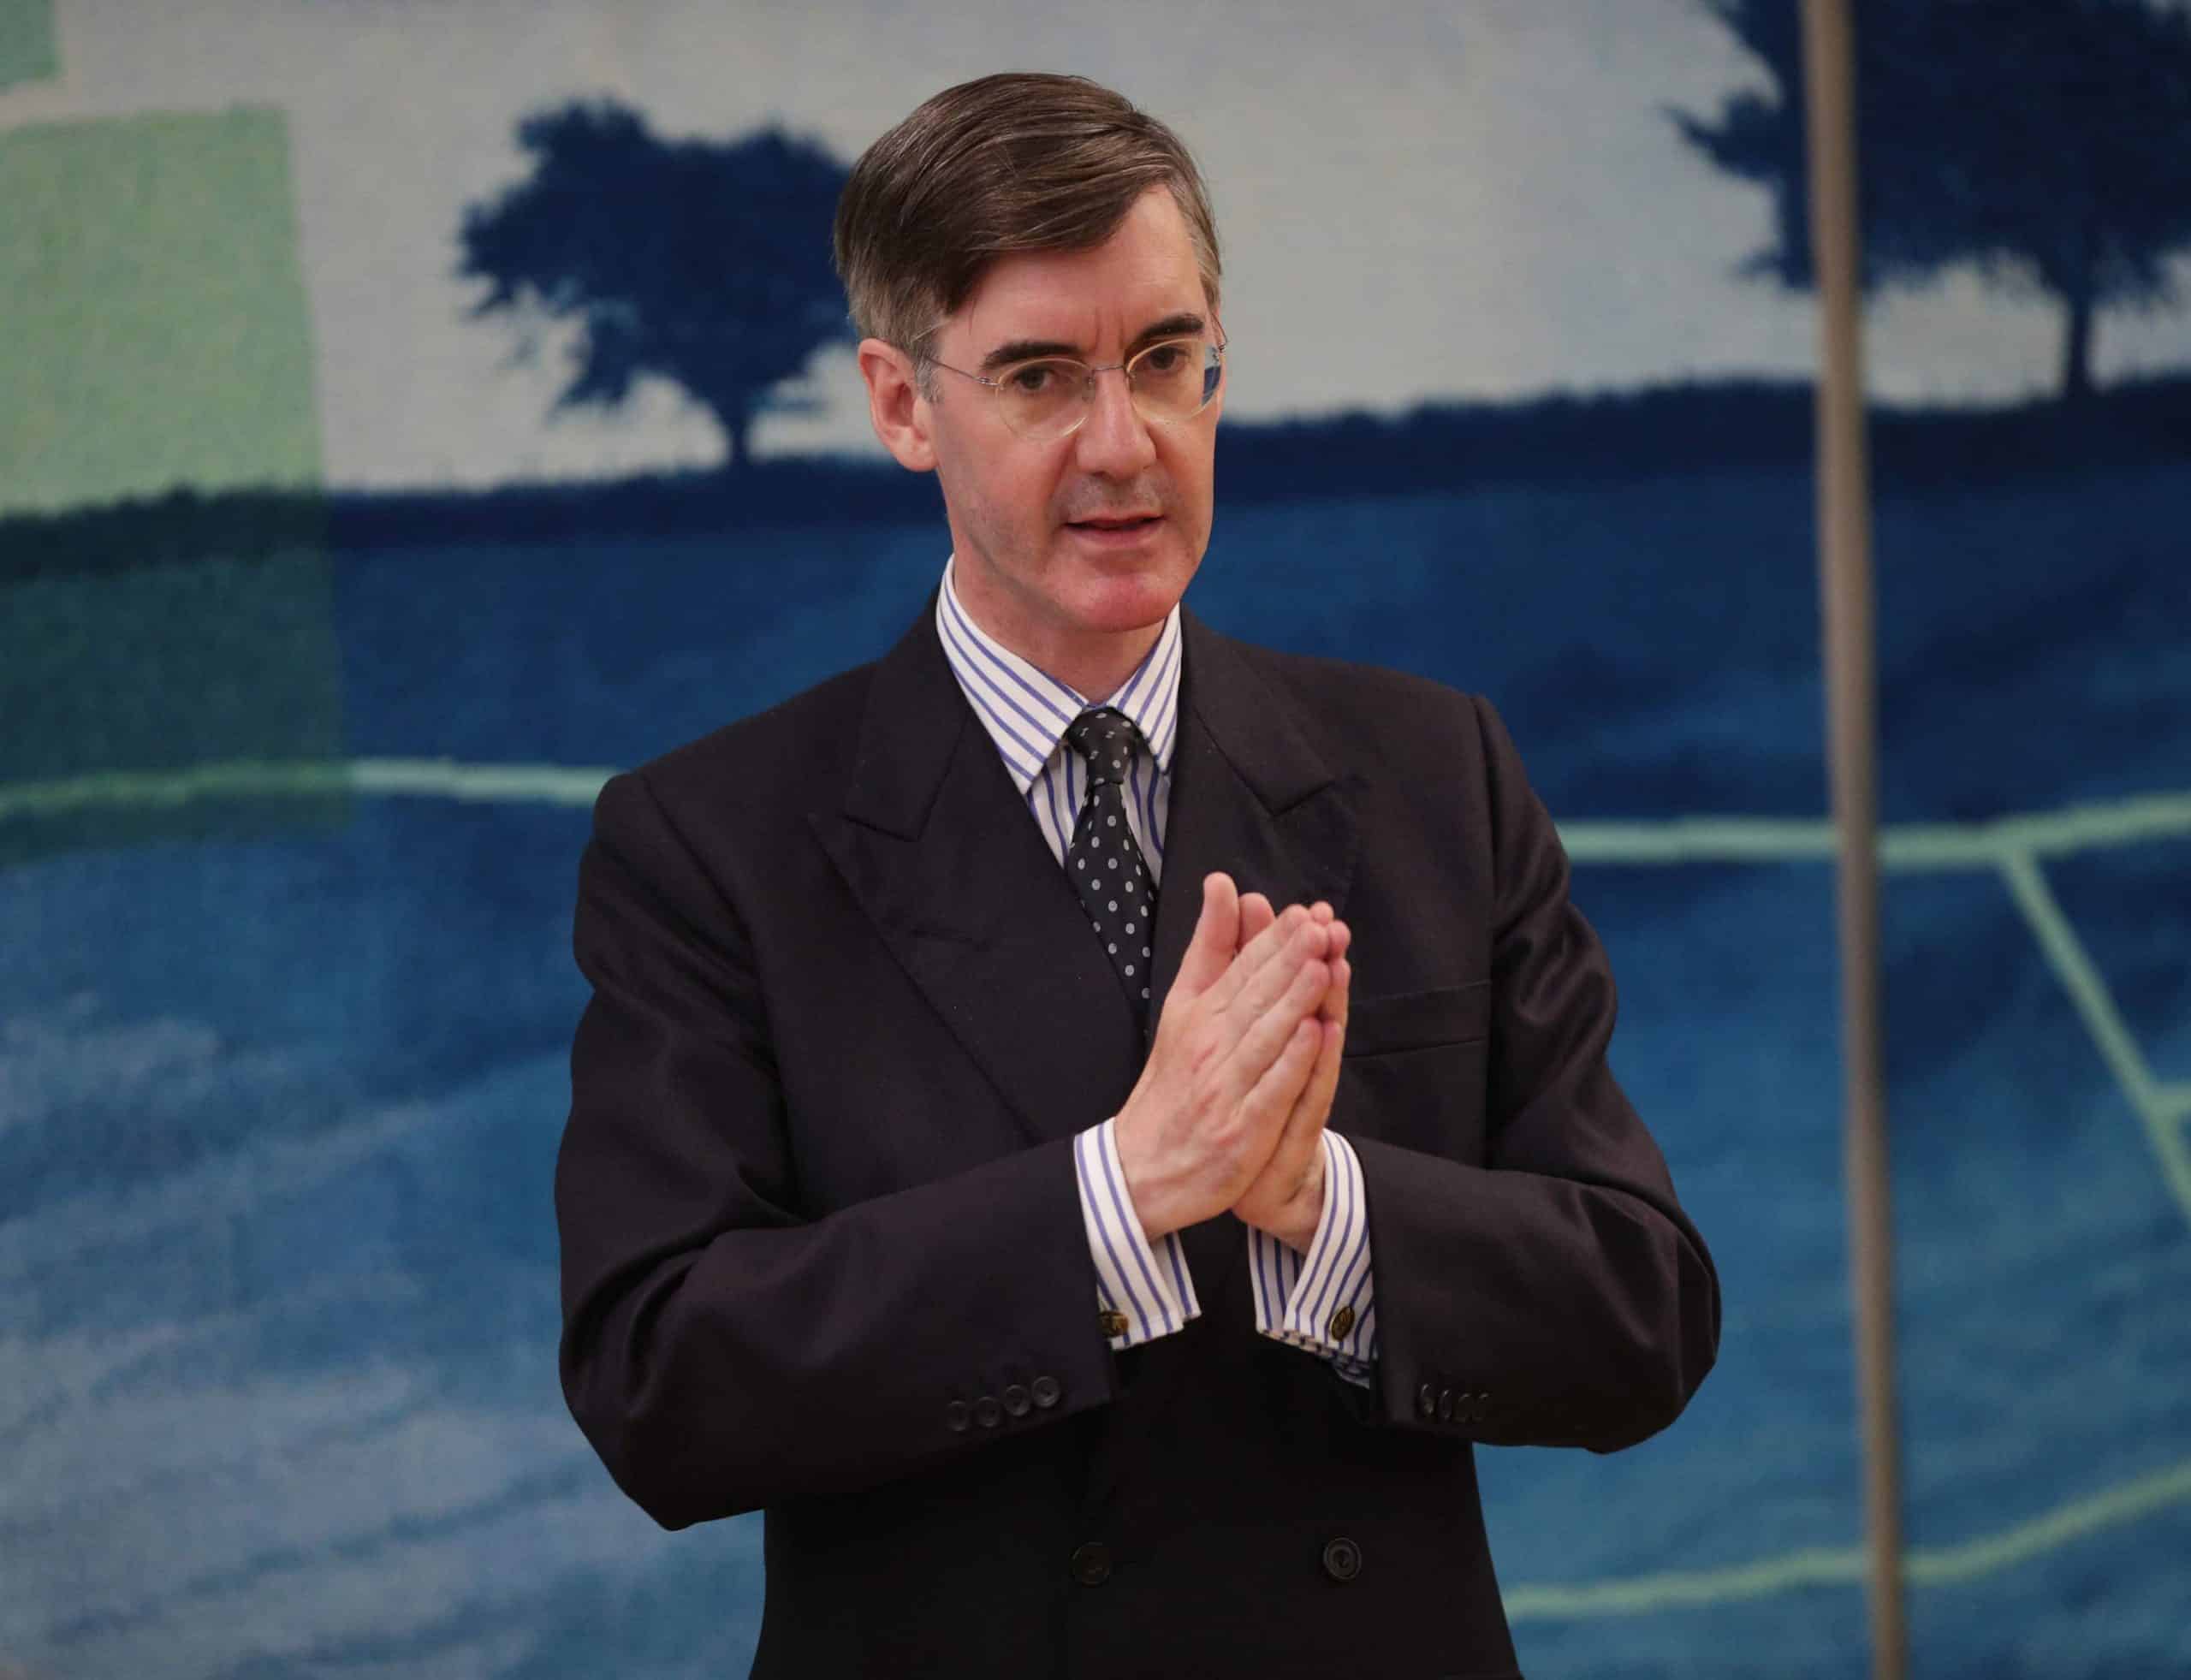 Rees-Mogg caught flouting Covid rules after crossing tiers to attend Latin mass